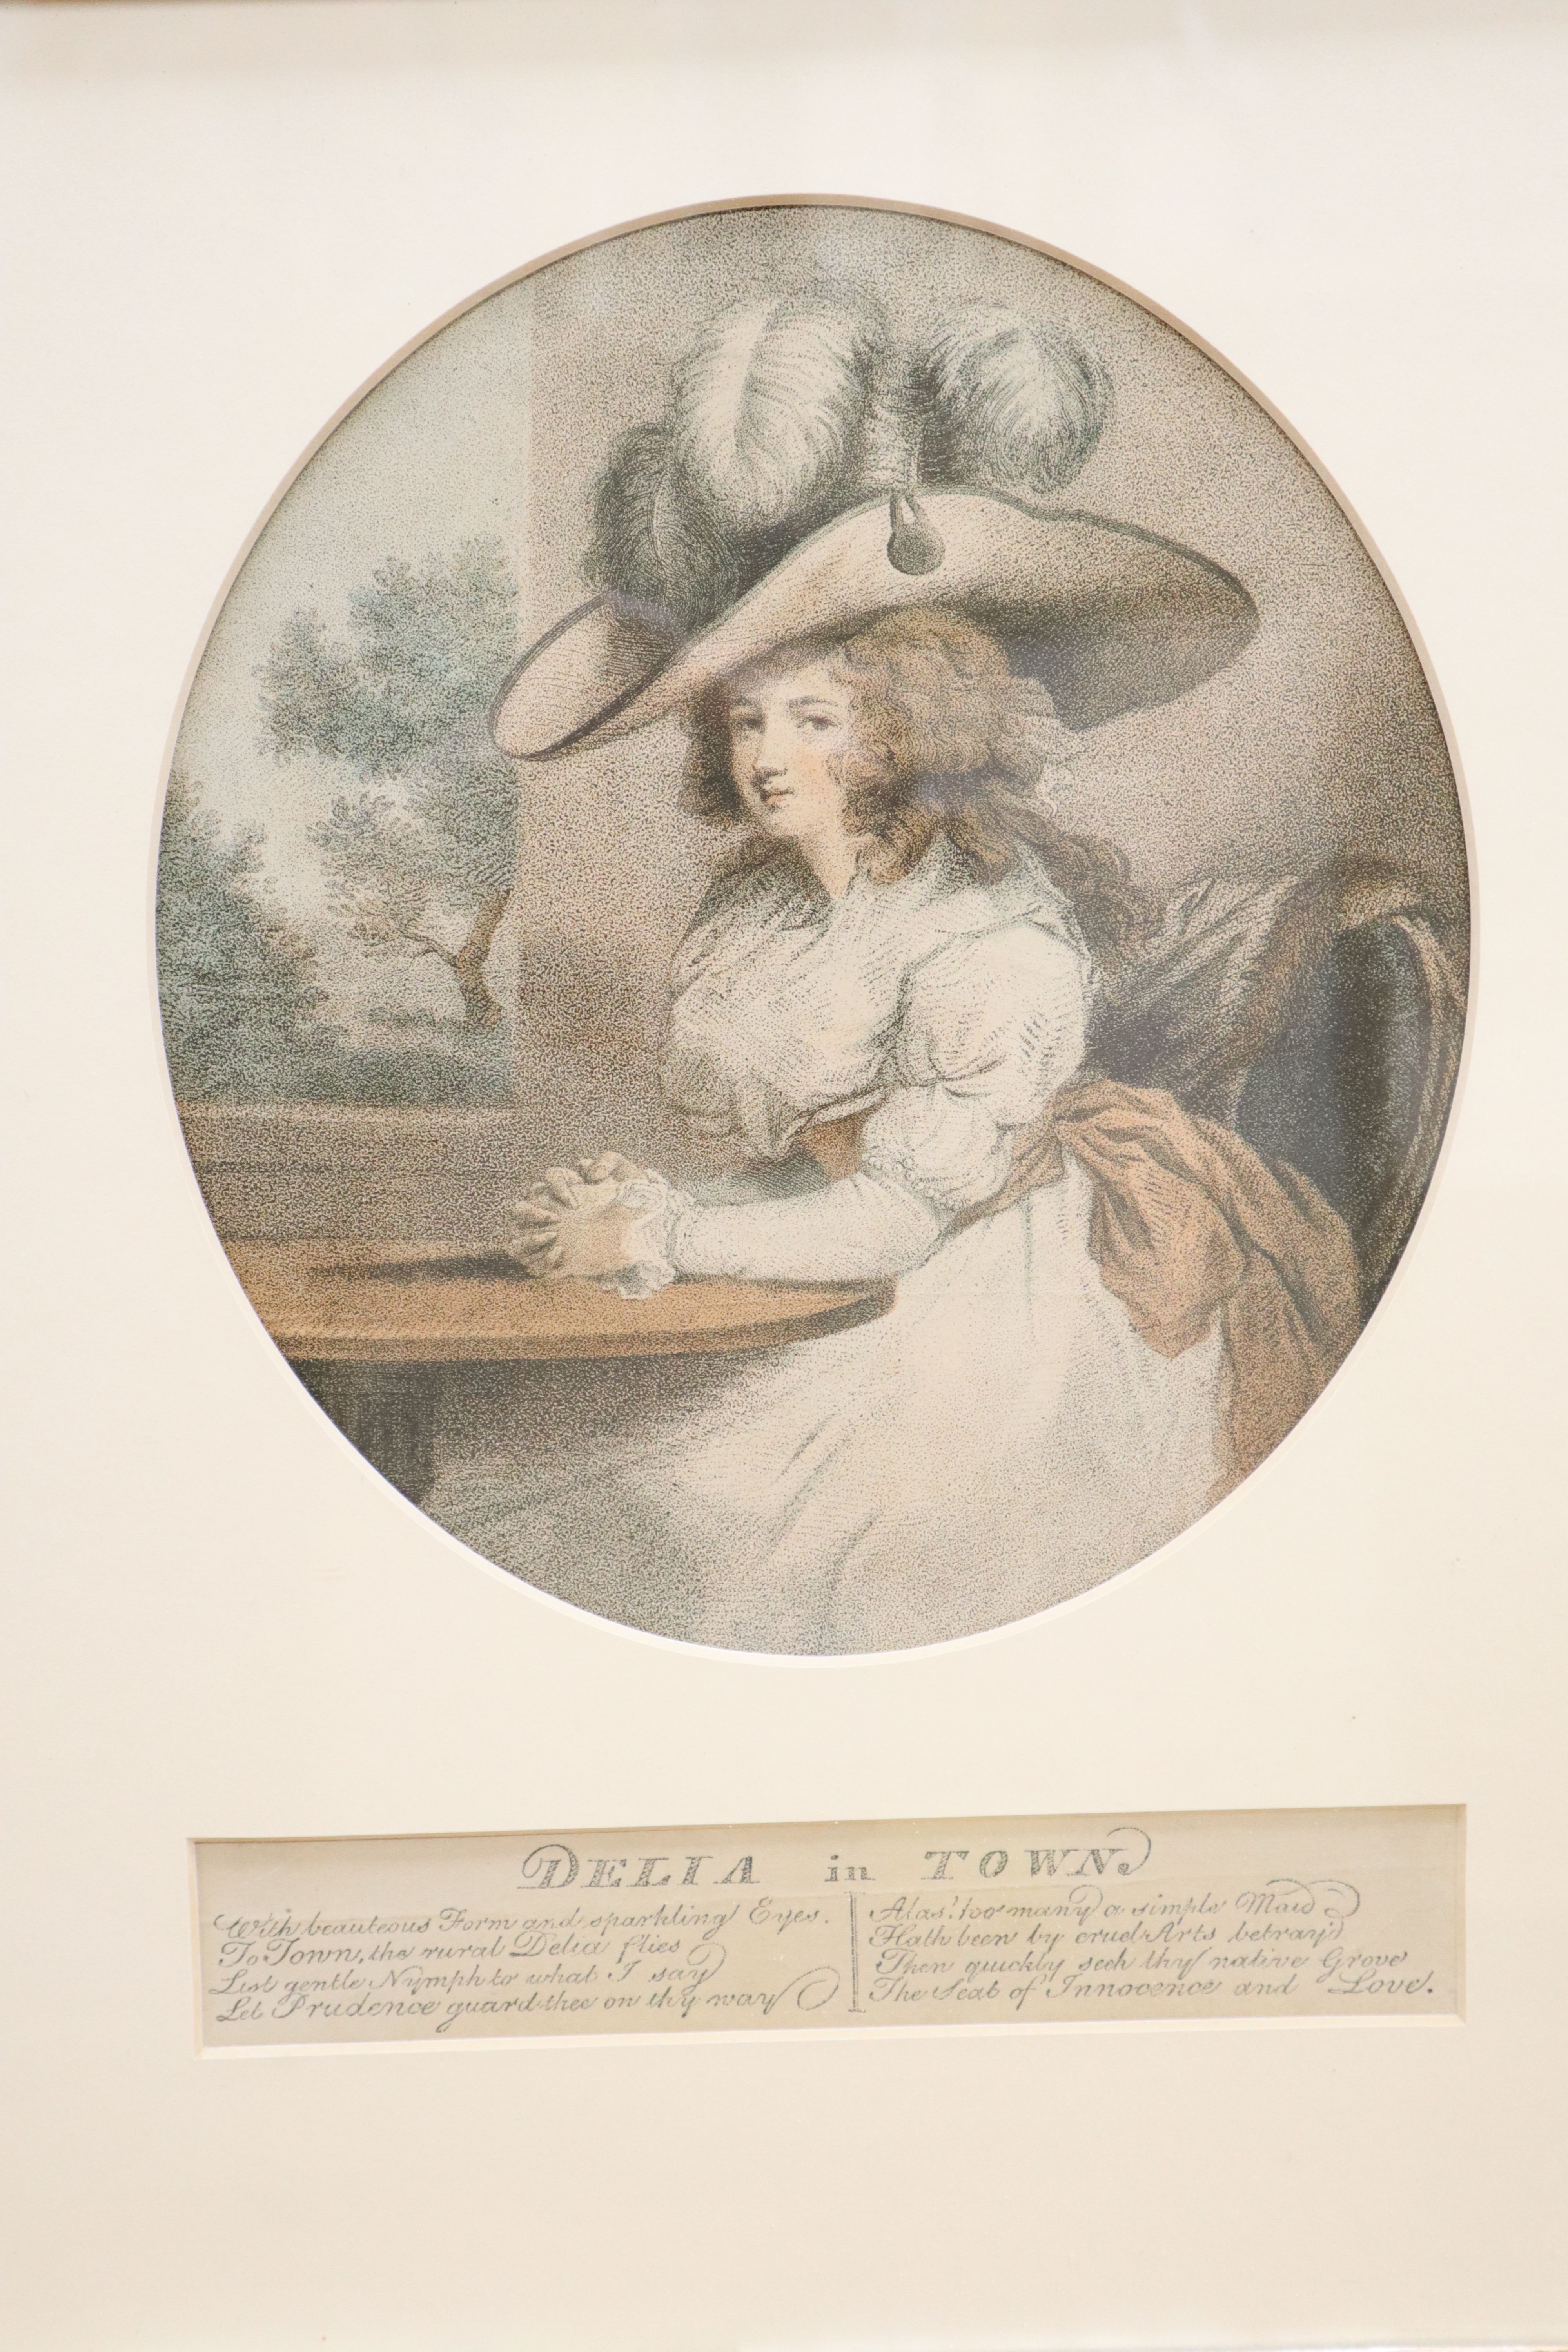 J. R. Smith after George Morland, a pair of late 18th century coloured mezzotints of ladies, Delia in the Country and Delia in the T